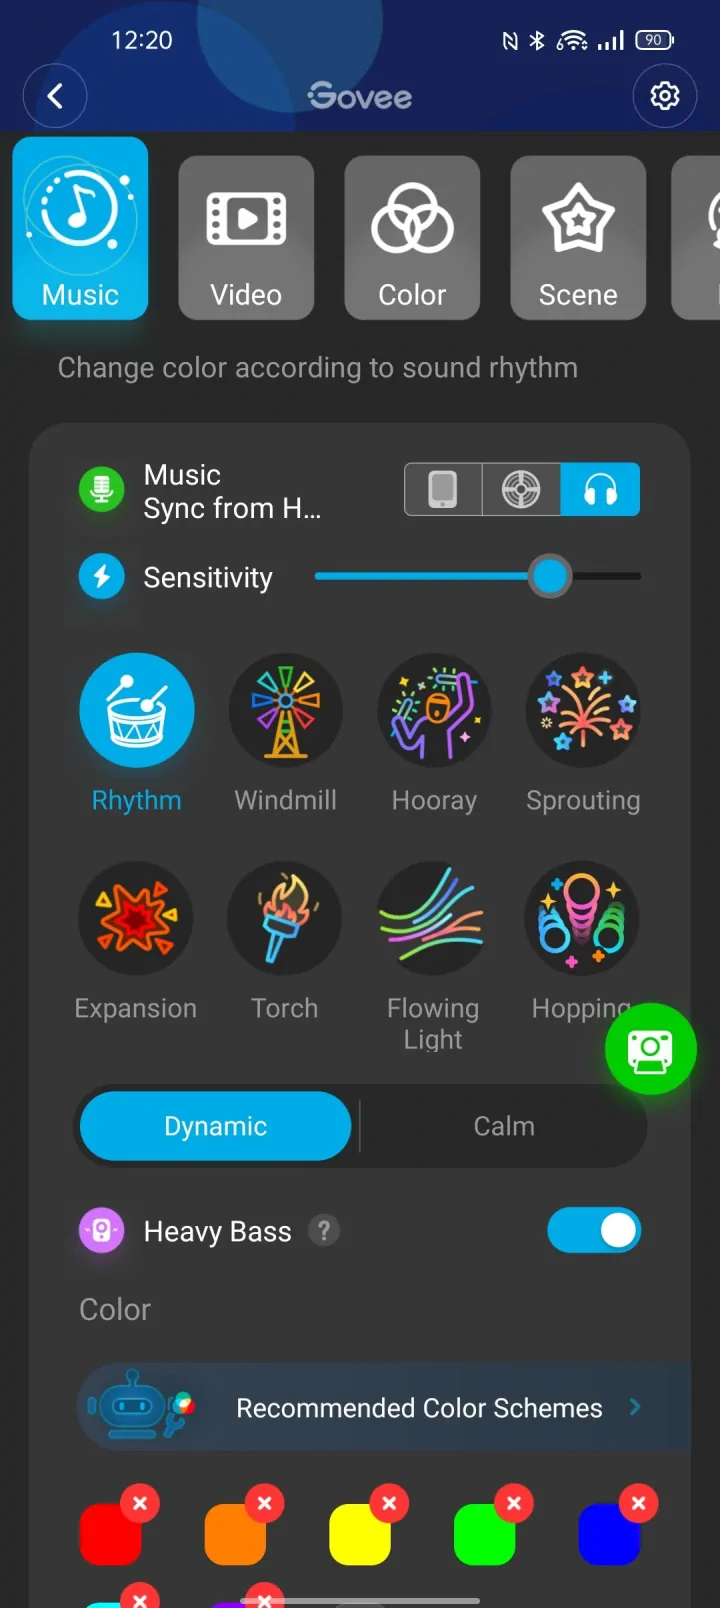 Govee-DreamView-G1-Pro-Govee-APP-Music-setting